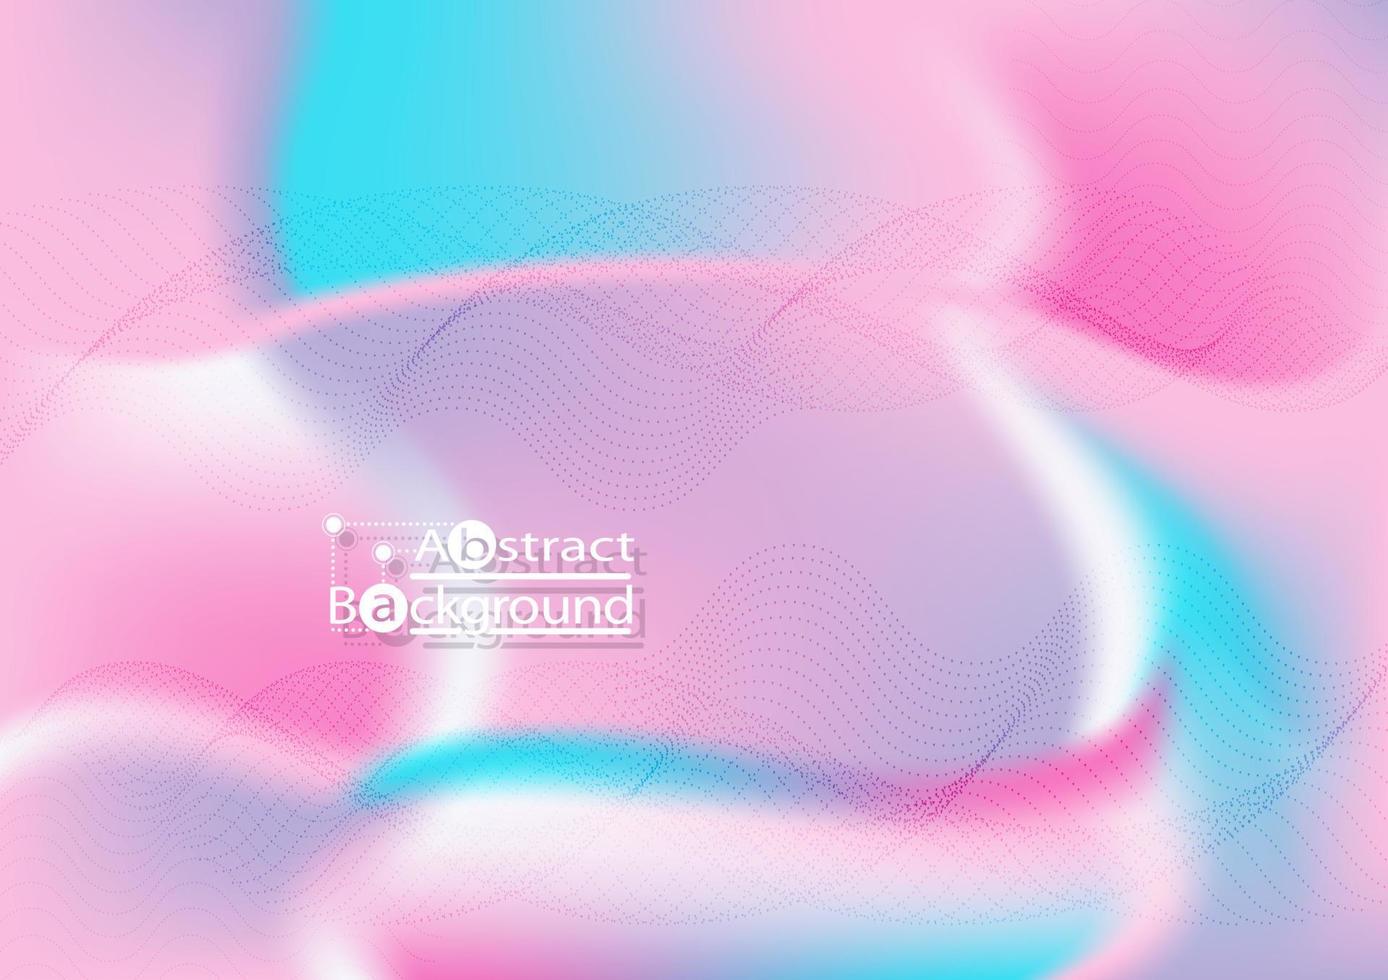 Abstract background. Wave effect Halftone. Pastel on the background mesh. vector illustration. 01